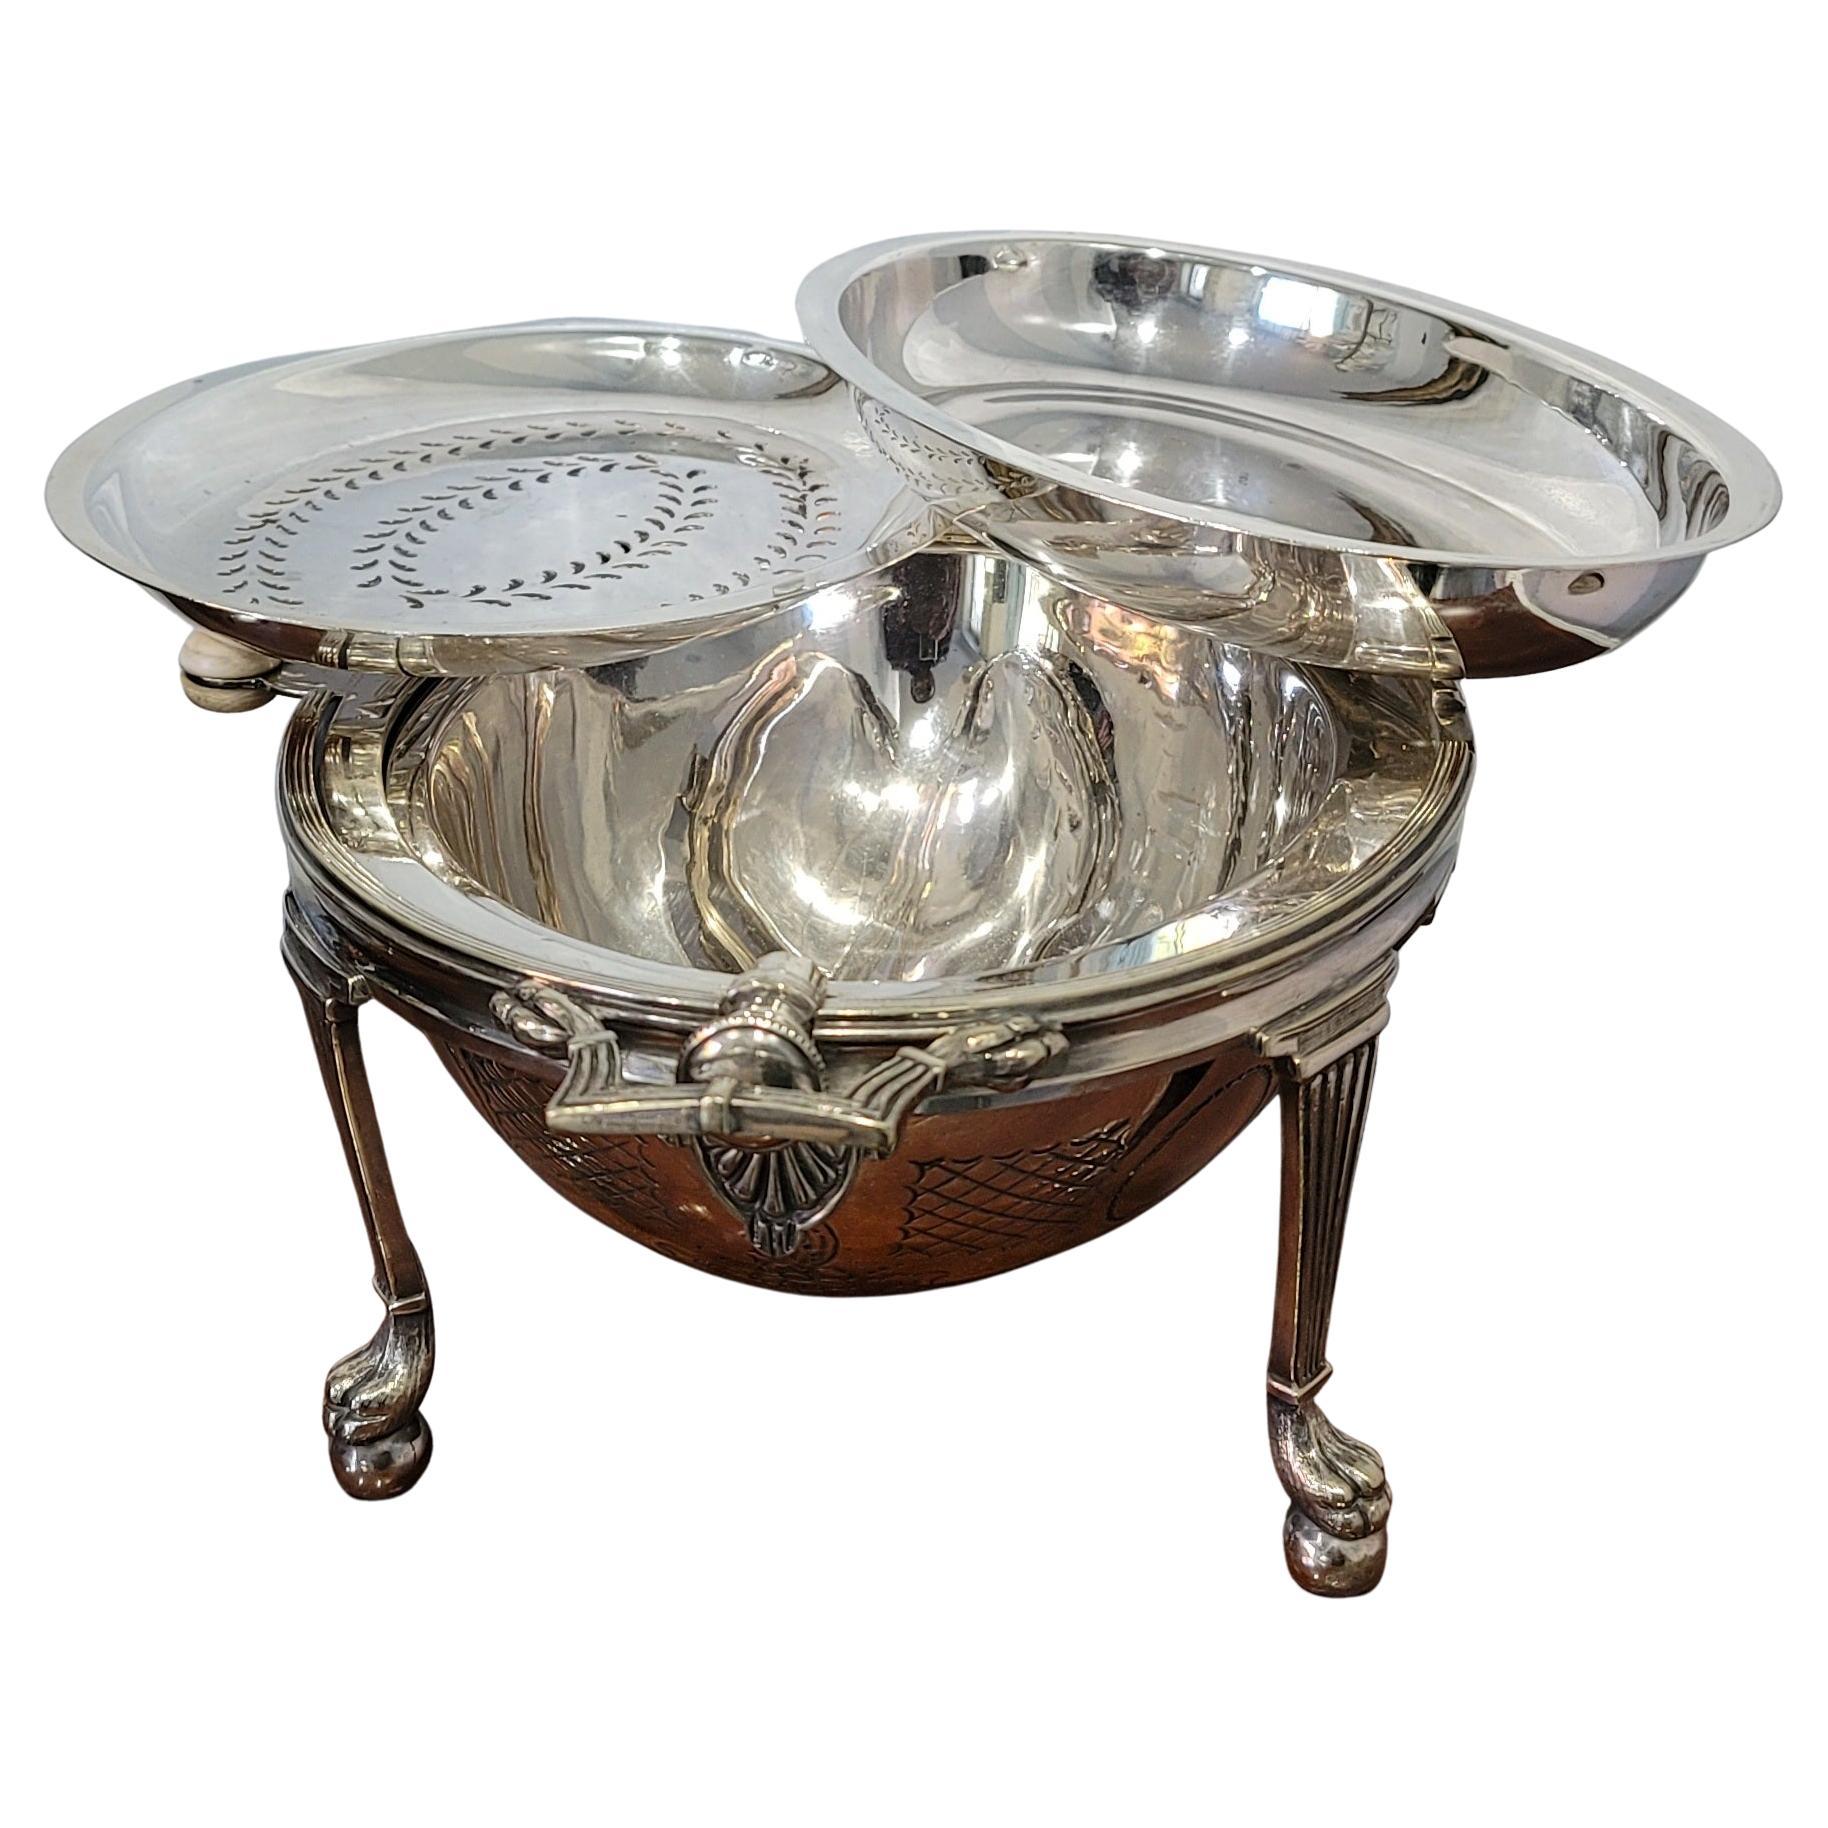 19th Century 1890s Drew & Sons Revolving Electroplate Silver Oval Serving Dish For Sale